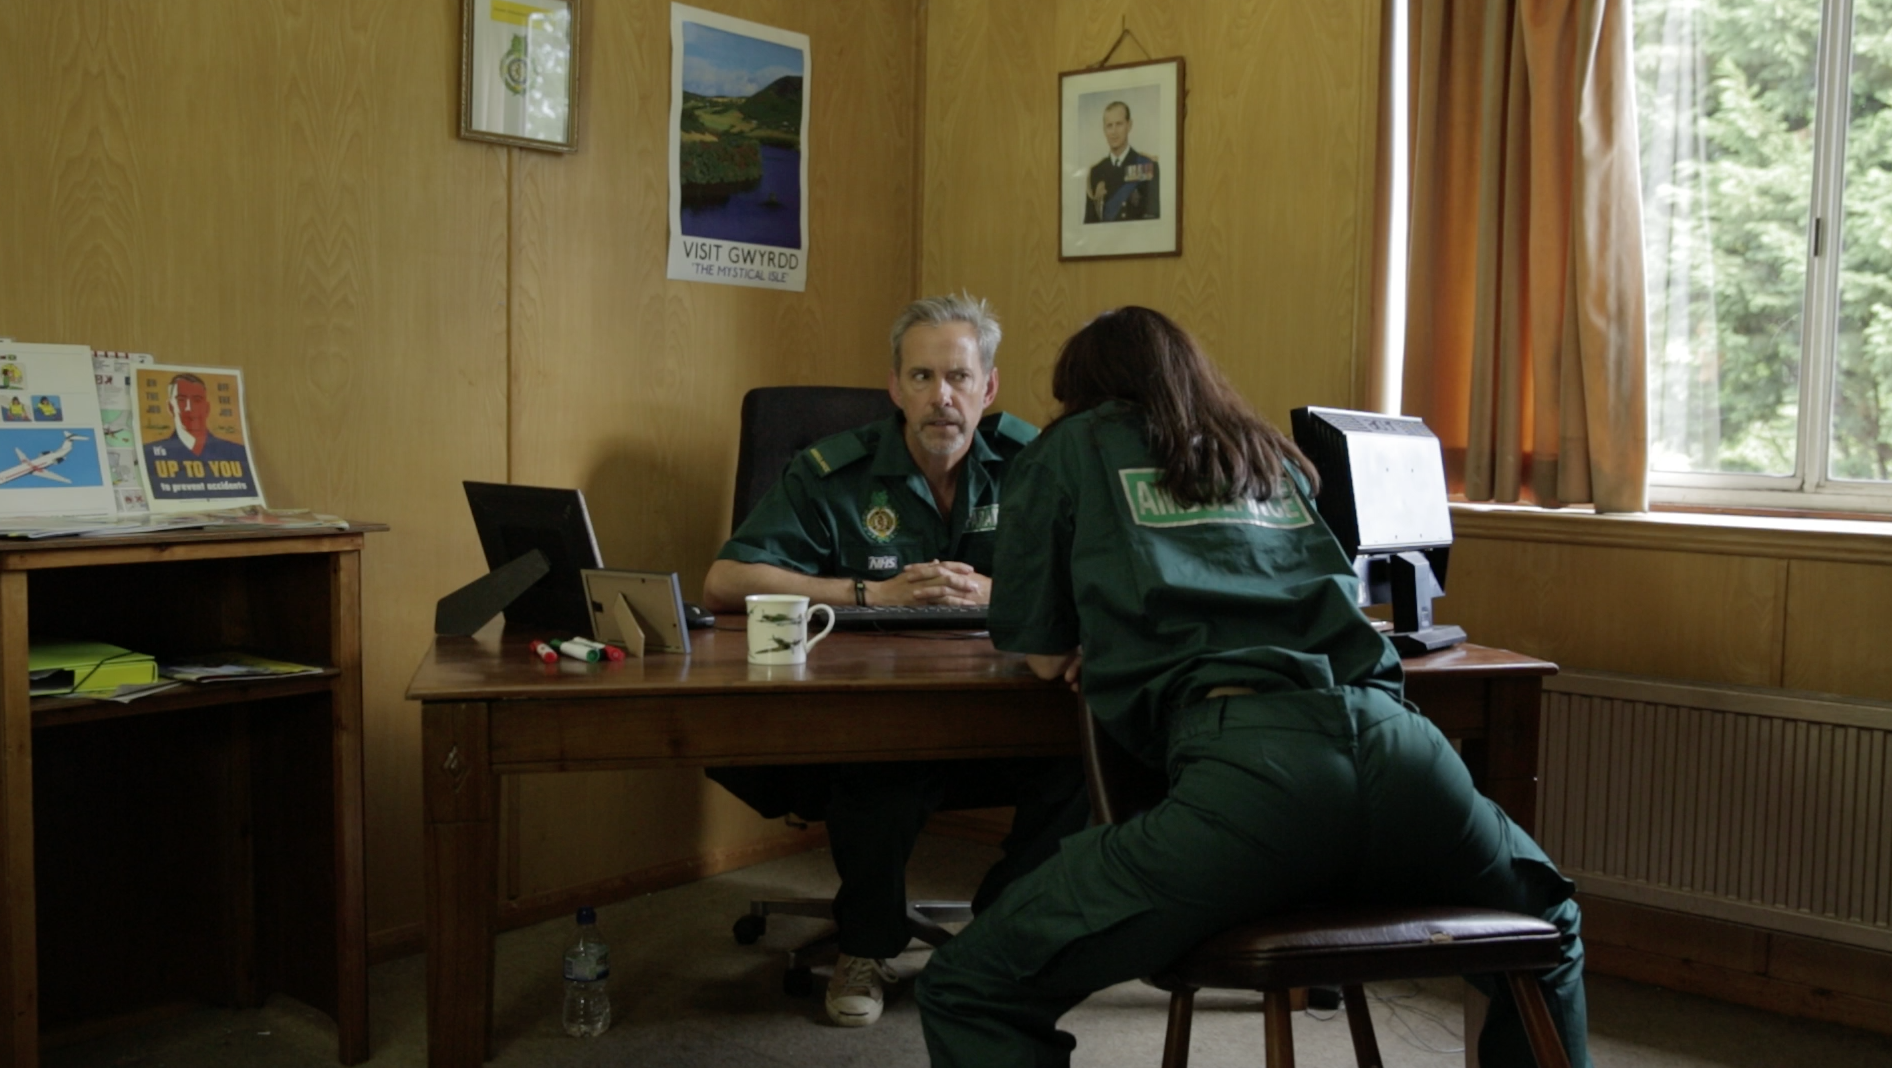 Gwyrdd Ambulance CEO in deep discussion with his Operations Manager